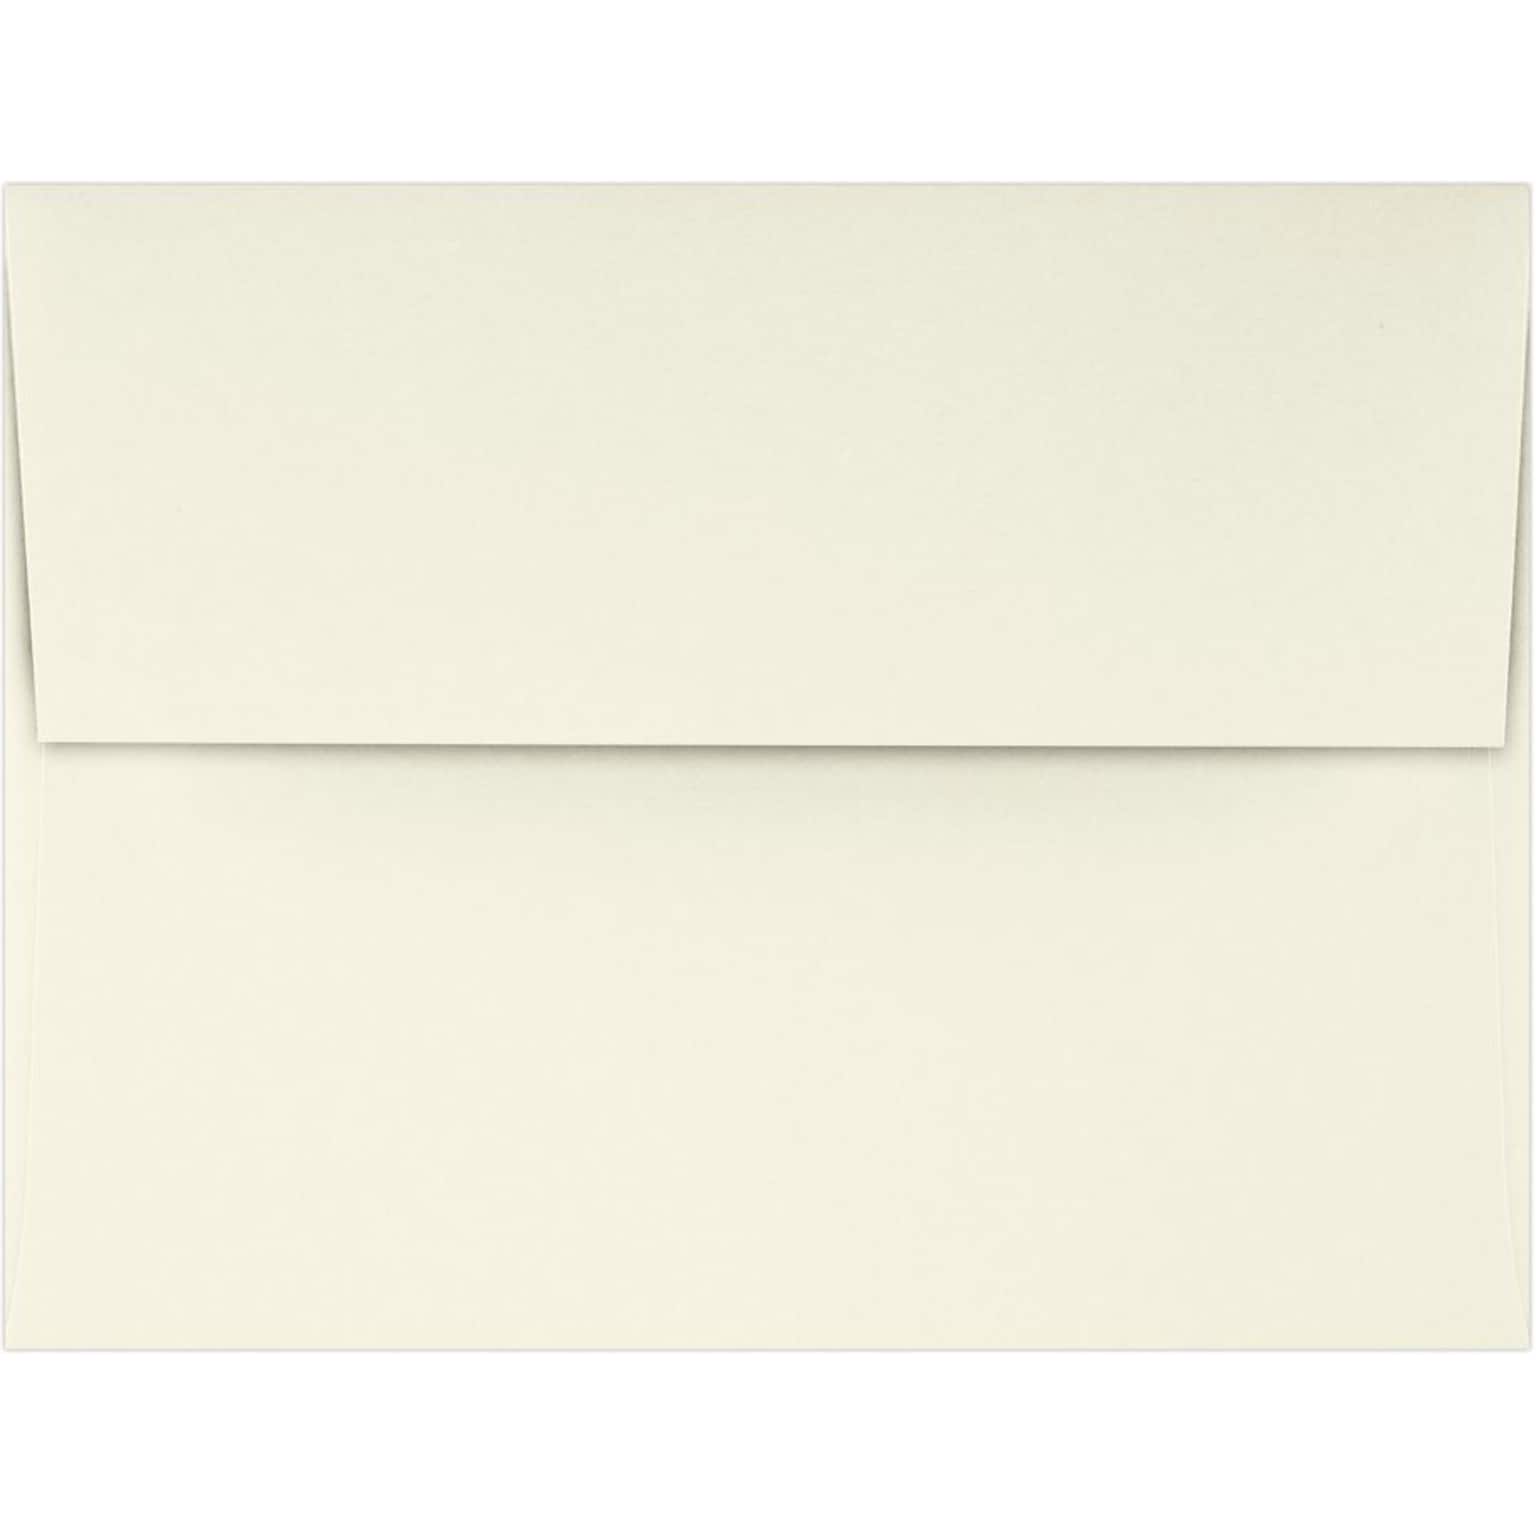 LUX A2 Invitation Envelopes (4 3/8 x 5 3/4) 1000/Pack, 70lb. Classic Crest® Natural White (4870-70NW-1000)